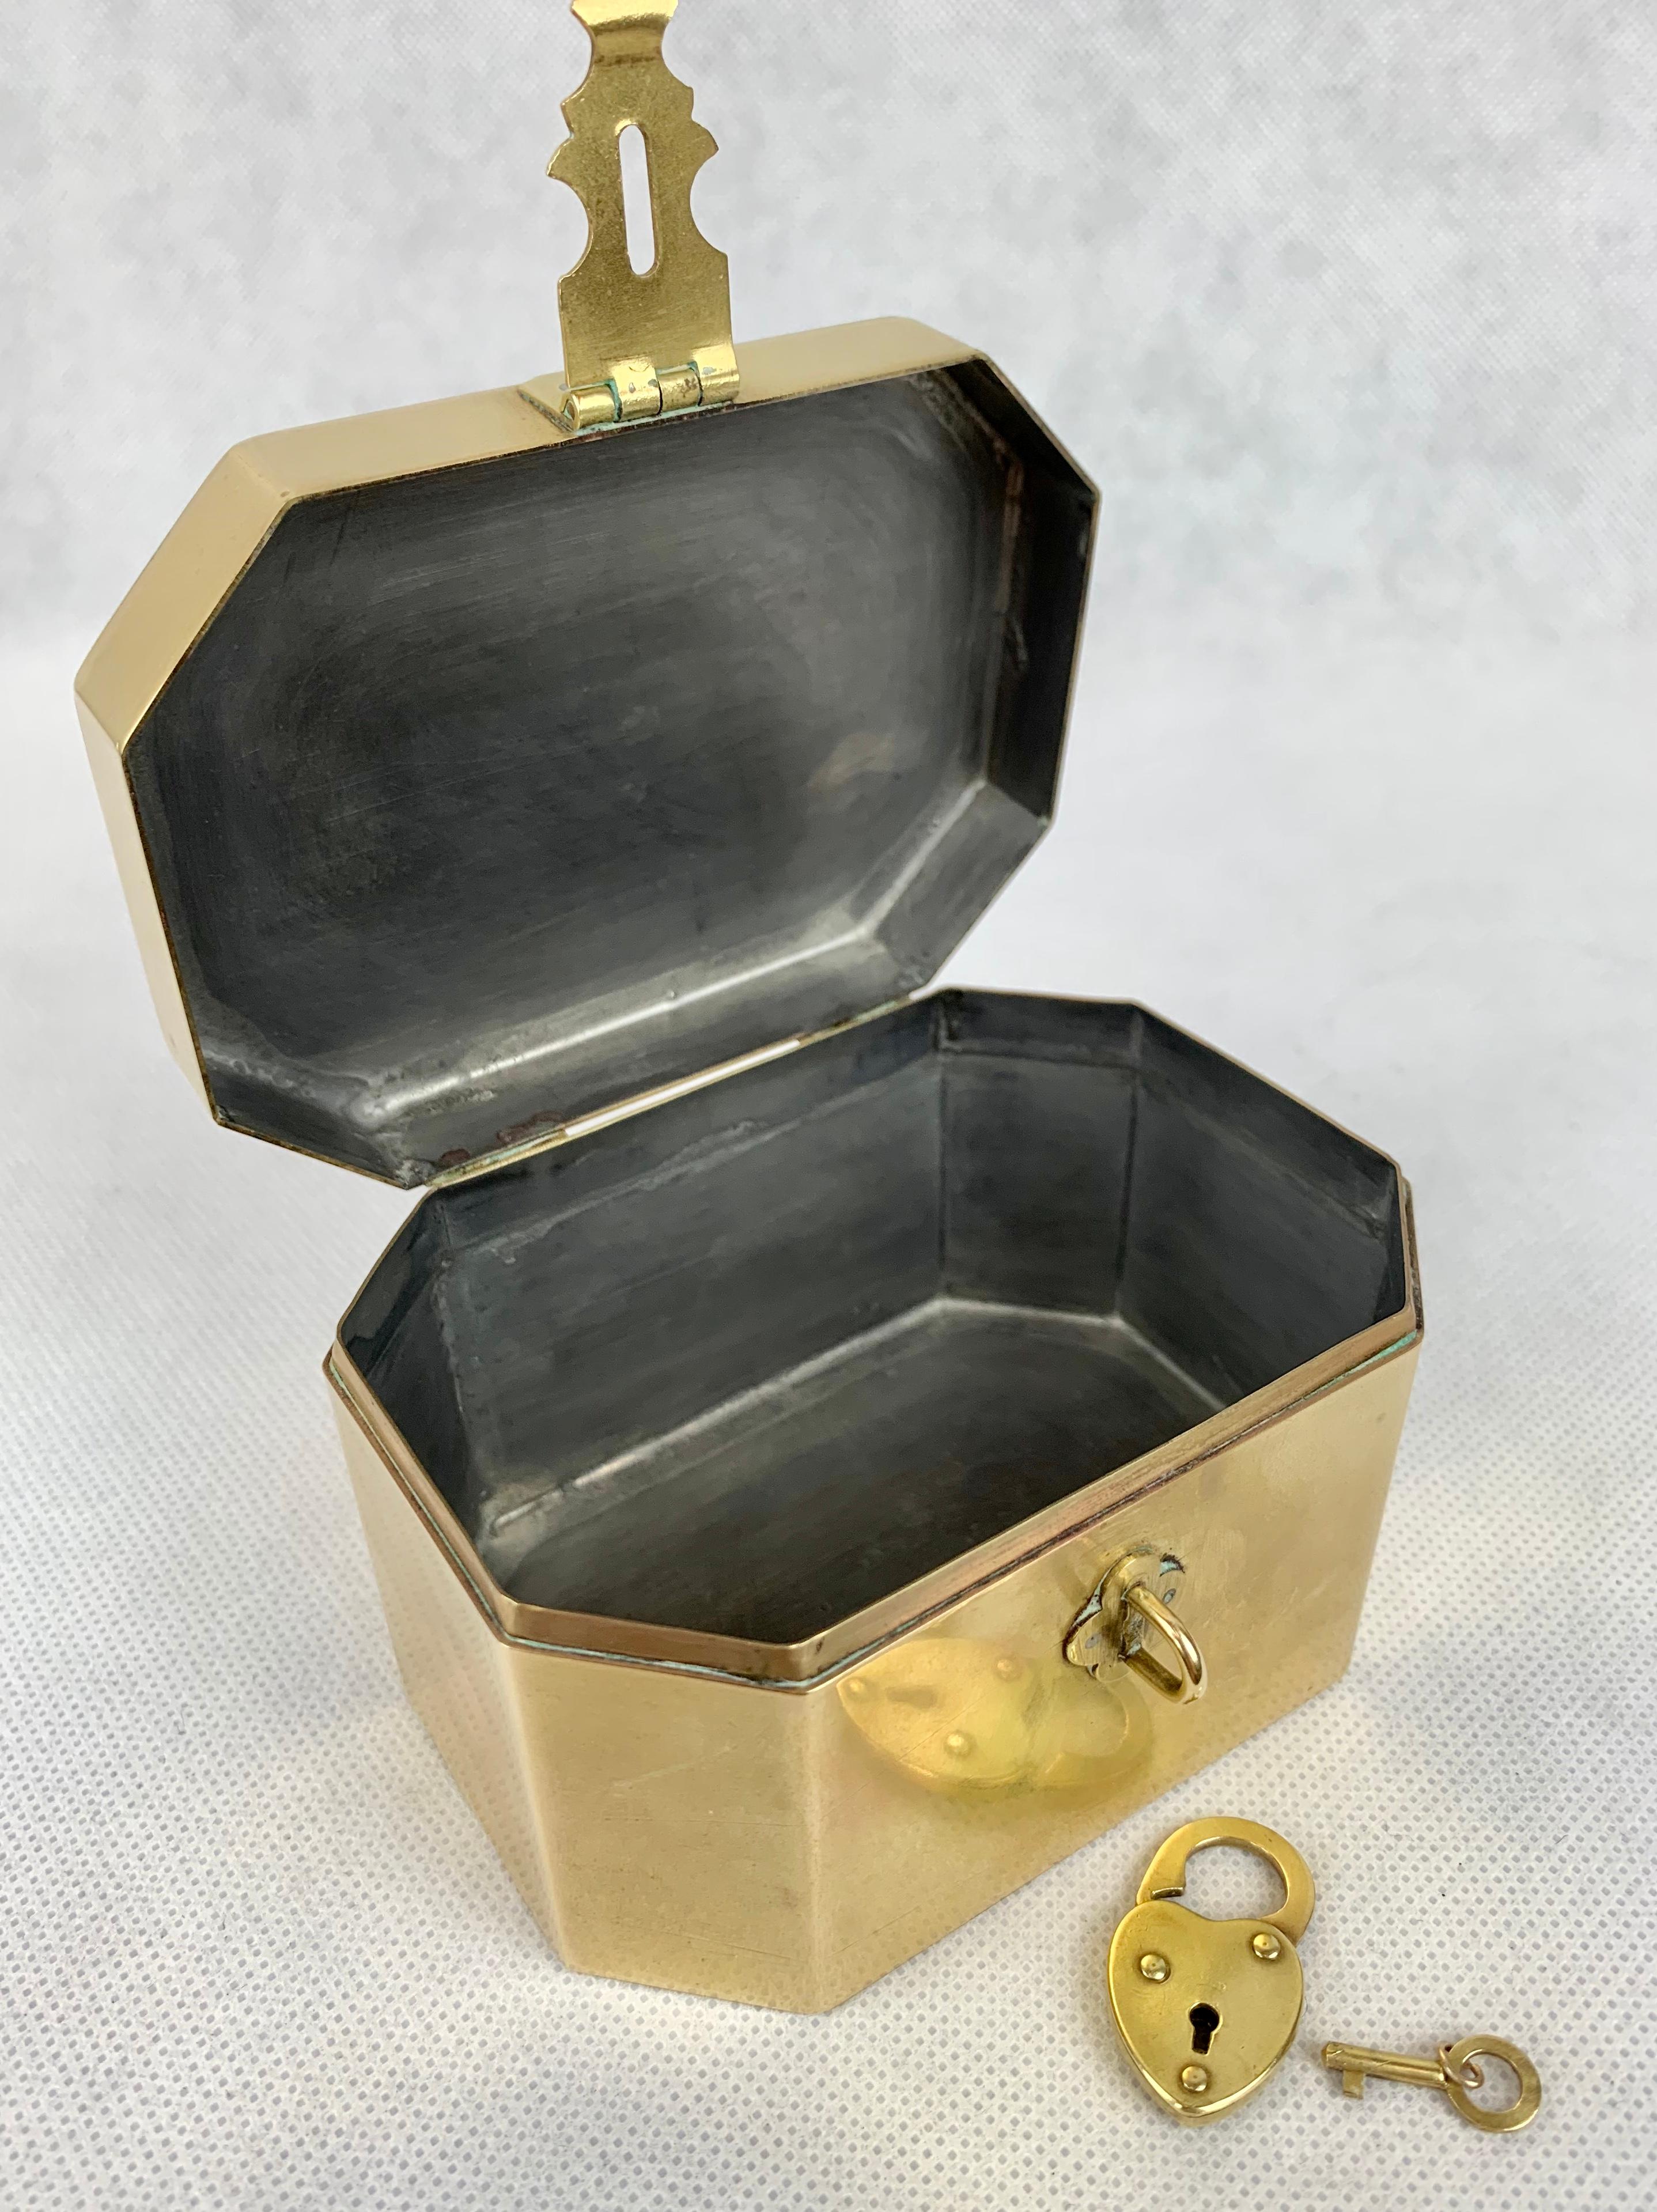 Small brass tea caddy with original heart shaped lock and tiny key. The rectangular shape has cut corners and a pewter lining. It is very special to find keys and locks married to the item. Tea was expensive and as a result kept under lock and key.